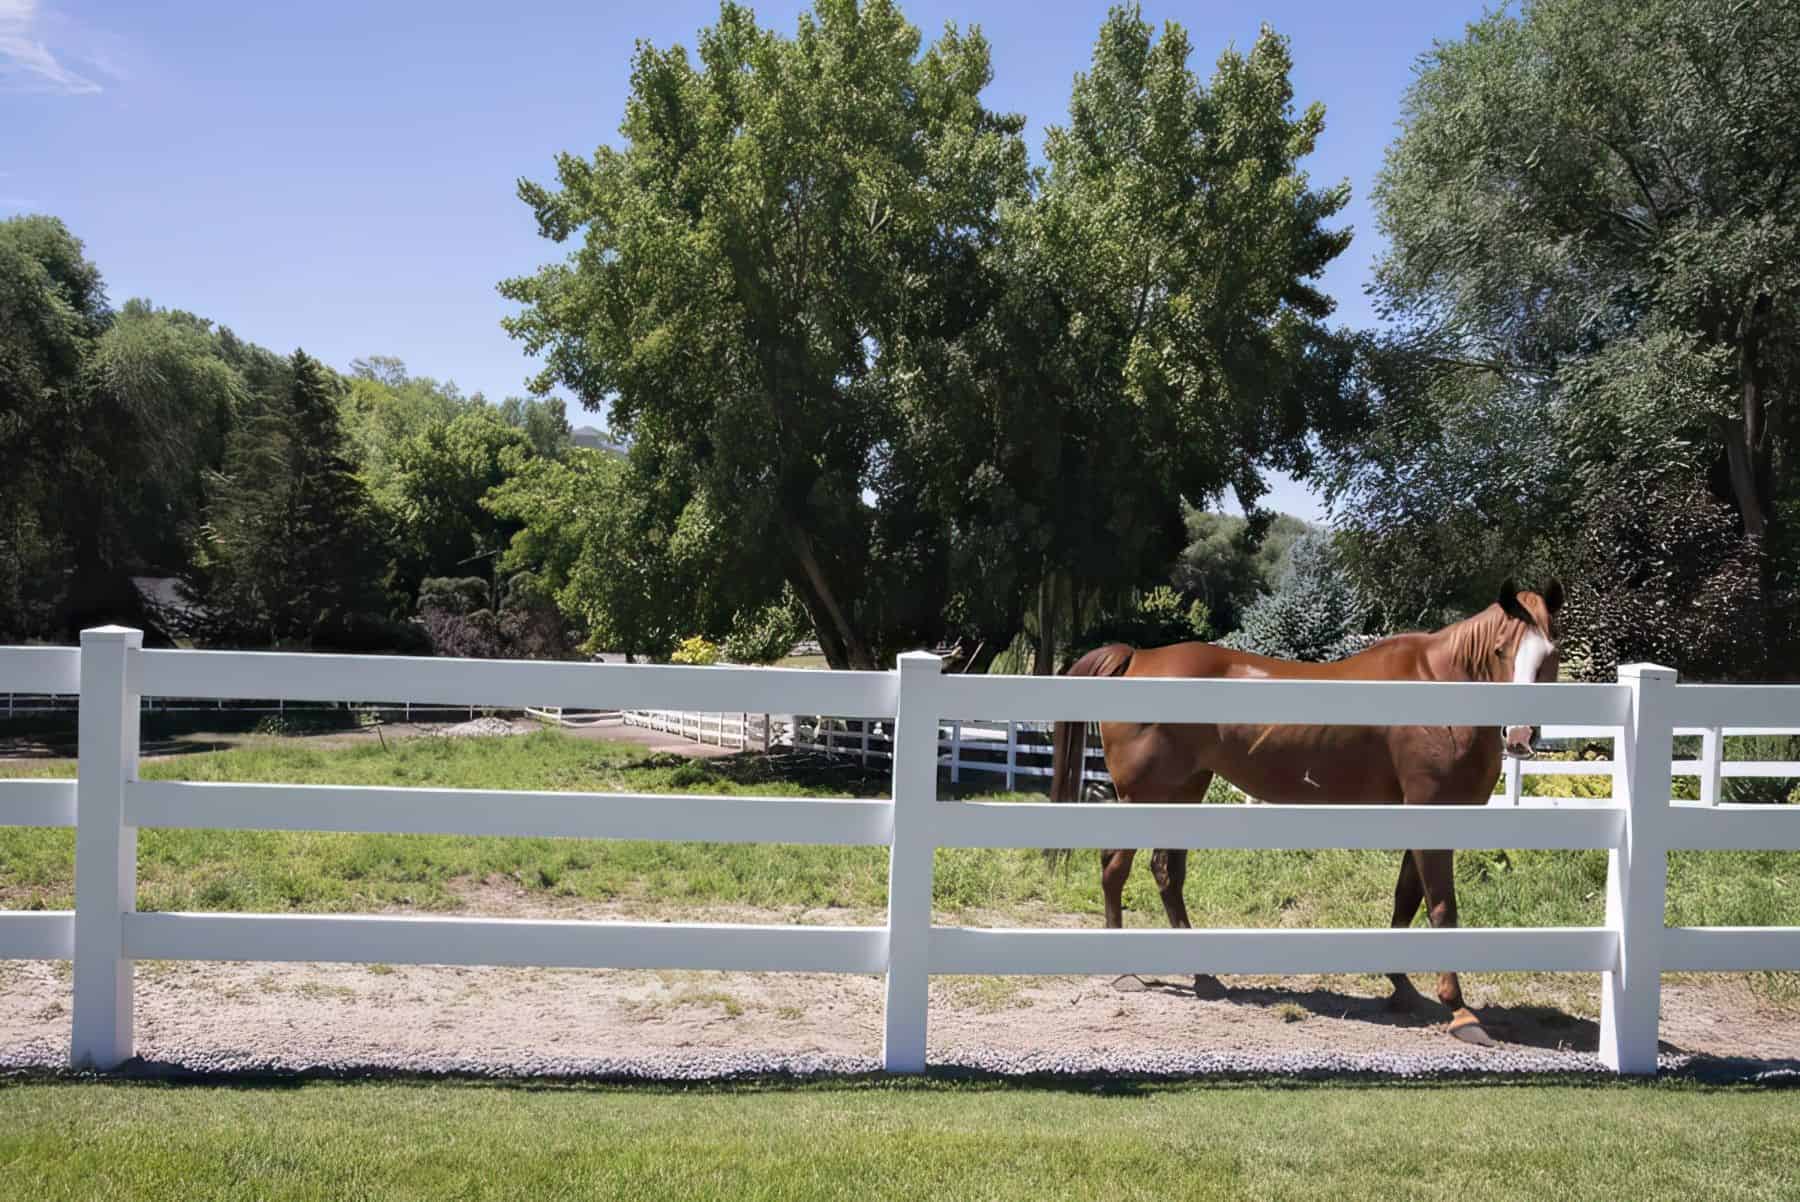 Vinyl 3-rail ranch fence in serene country setting, open field, clear sky, trees, and a horse grazing in the background.